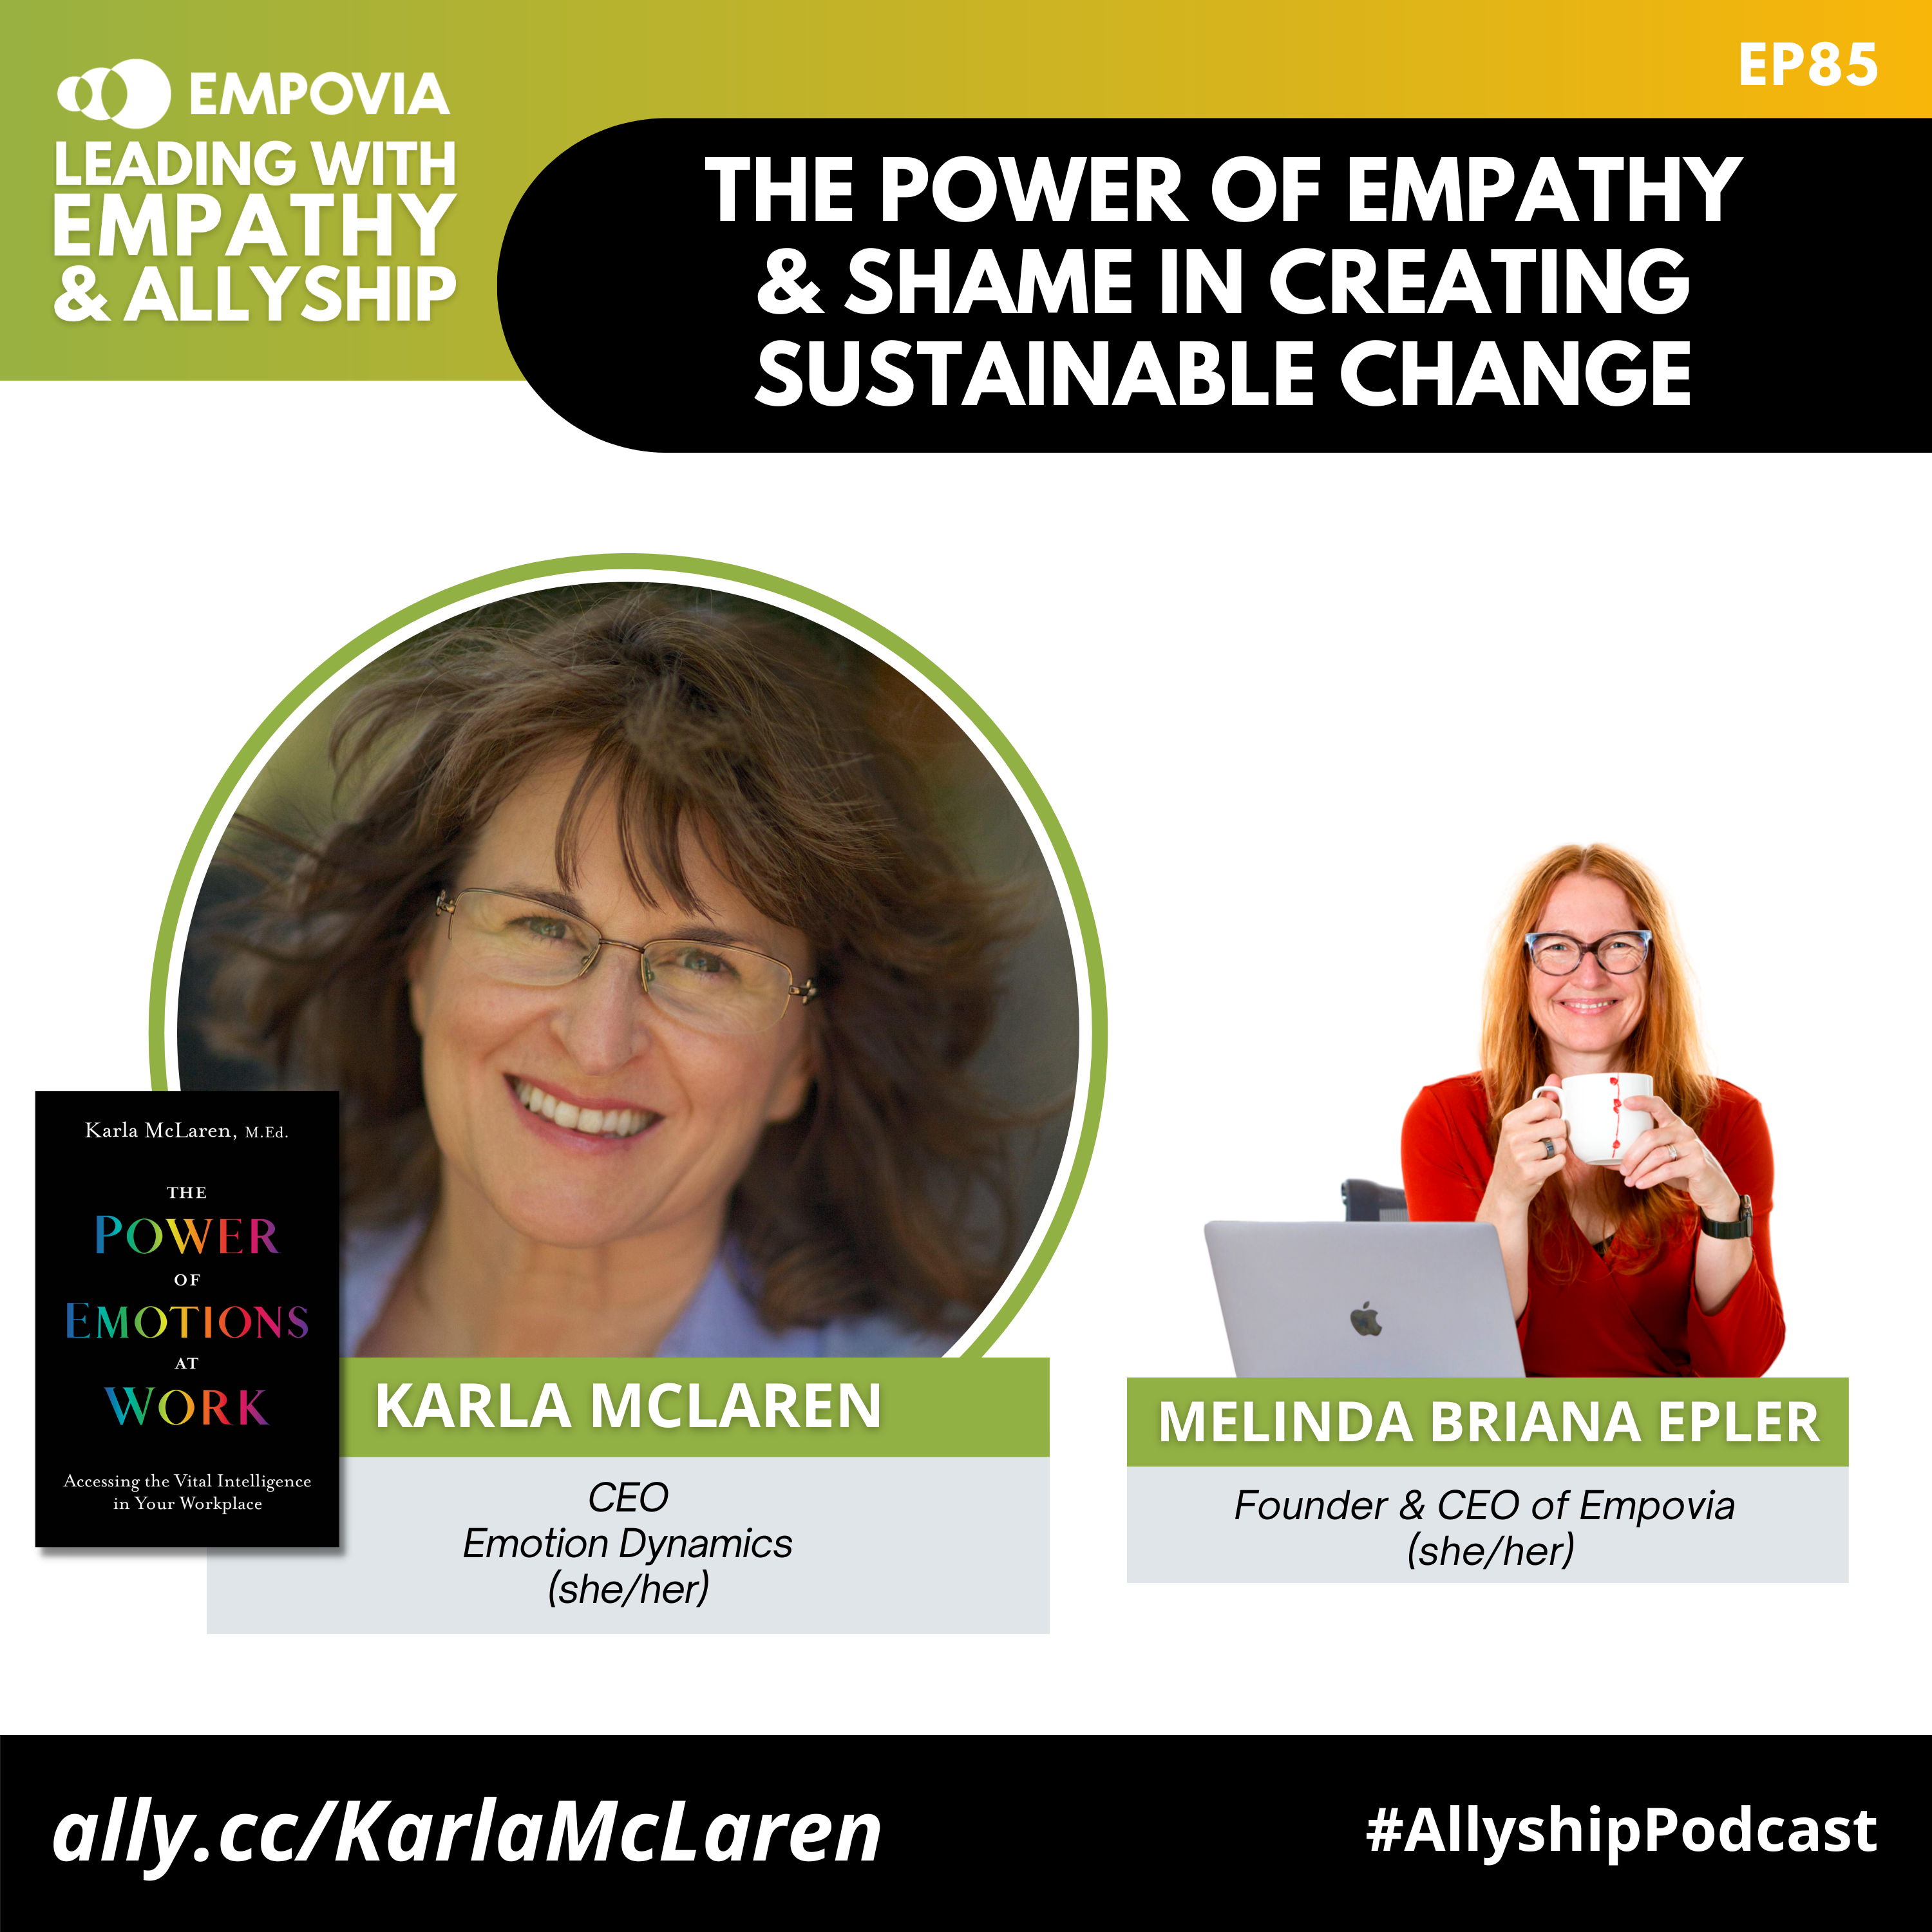 Leading With Empathy & Allyship promo and photos of Karla McLaren, a smiling, middle-aged, brown-haired, green-eyed, White lady person with glasses and a blue shirt; beside her is the black book cover of THE POWER OF EMOTIONS AT WORK: Accessing the Vital Intelligence in Your Workplace; and host Melinda Briana Epler, a White woman with red hair, glasses, and orange shirt holding a white mug behind a laptop.